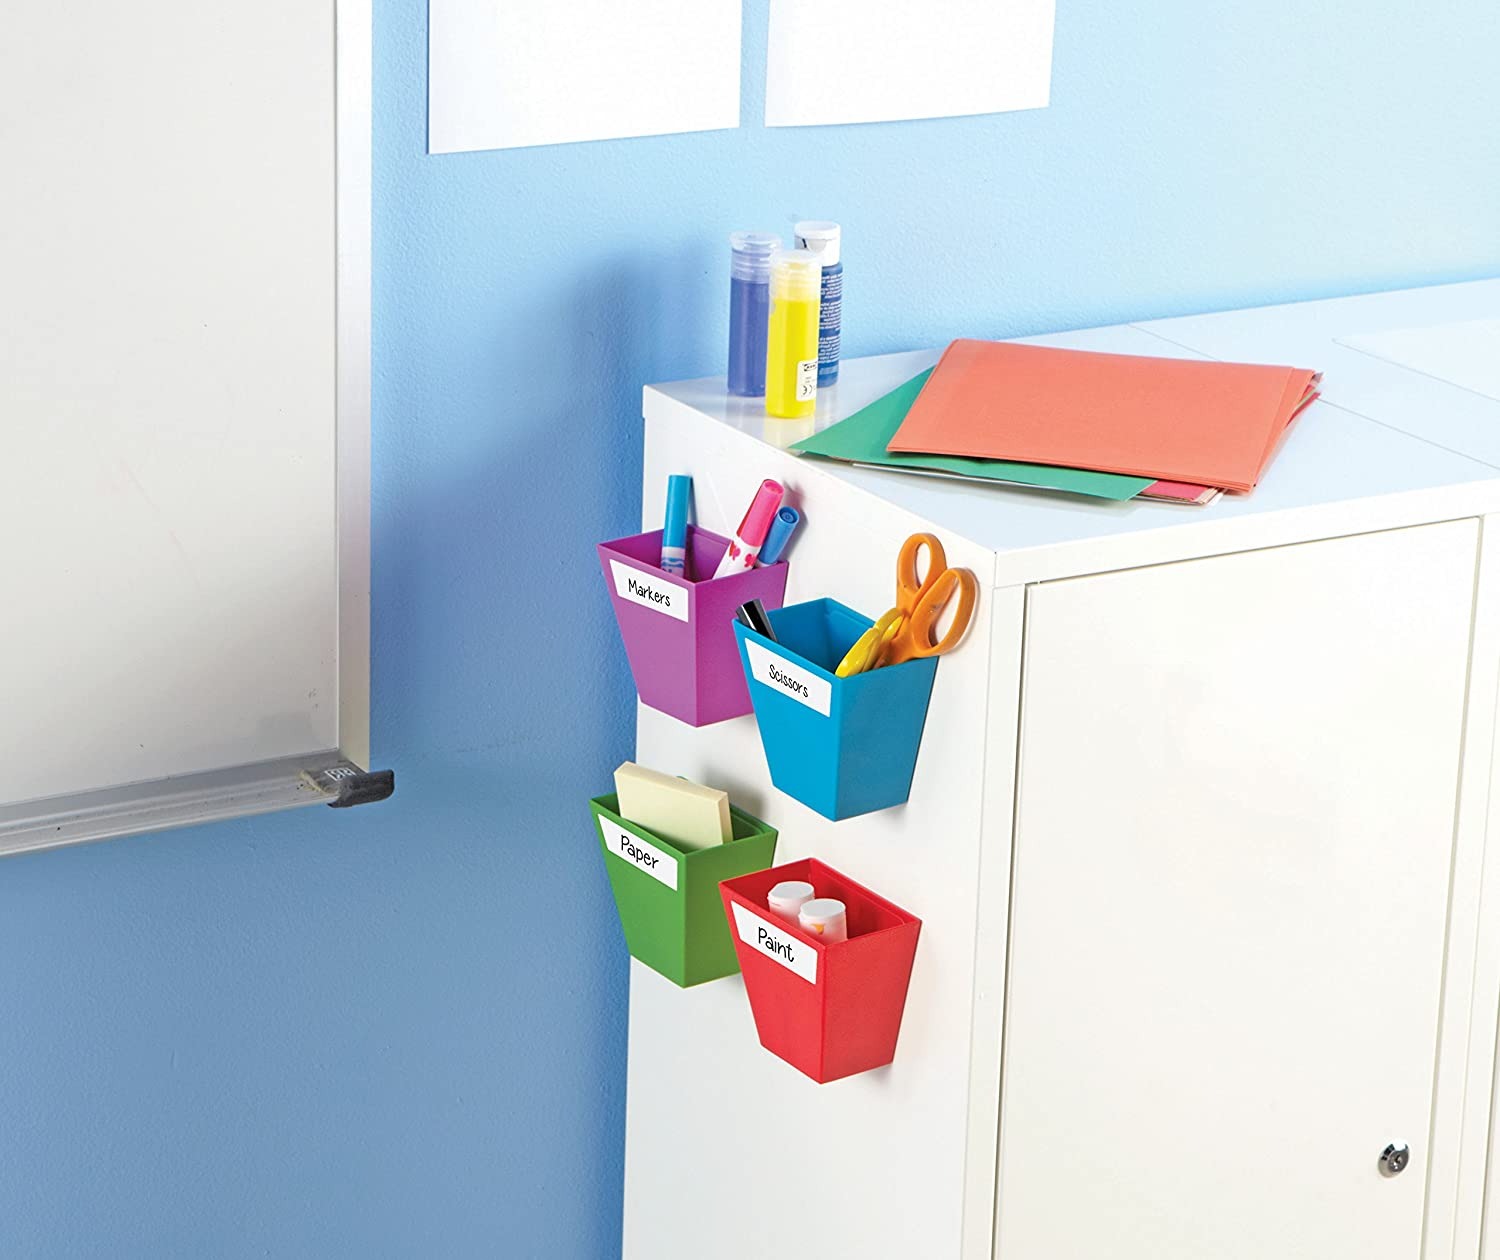 Create-a-Space Storage Bins, The Create-a-Space Storage Bins are designed to stand on their own or attach to a magnetic surface, these storage bins are great for organising your pens, pencils, art supplies and more. The Learning Resources Magnetic Create-a-Space Storage Boxes has the following benefits Vibrant and modern design Ideal storage solution for your class or home office Boxes fix to any magnetic surface or can stand independently Includes four vibrant storage boxes and a sheet of wipe-clean labels